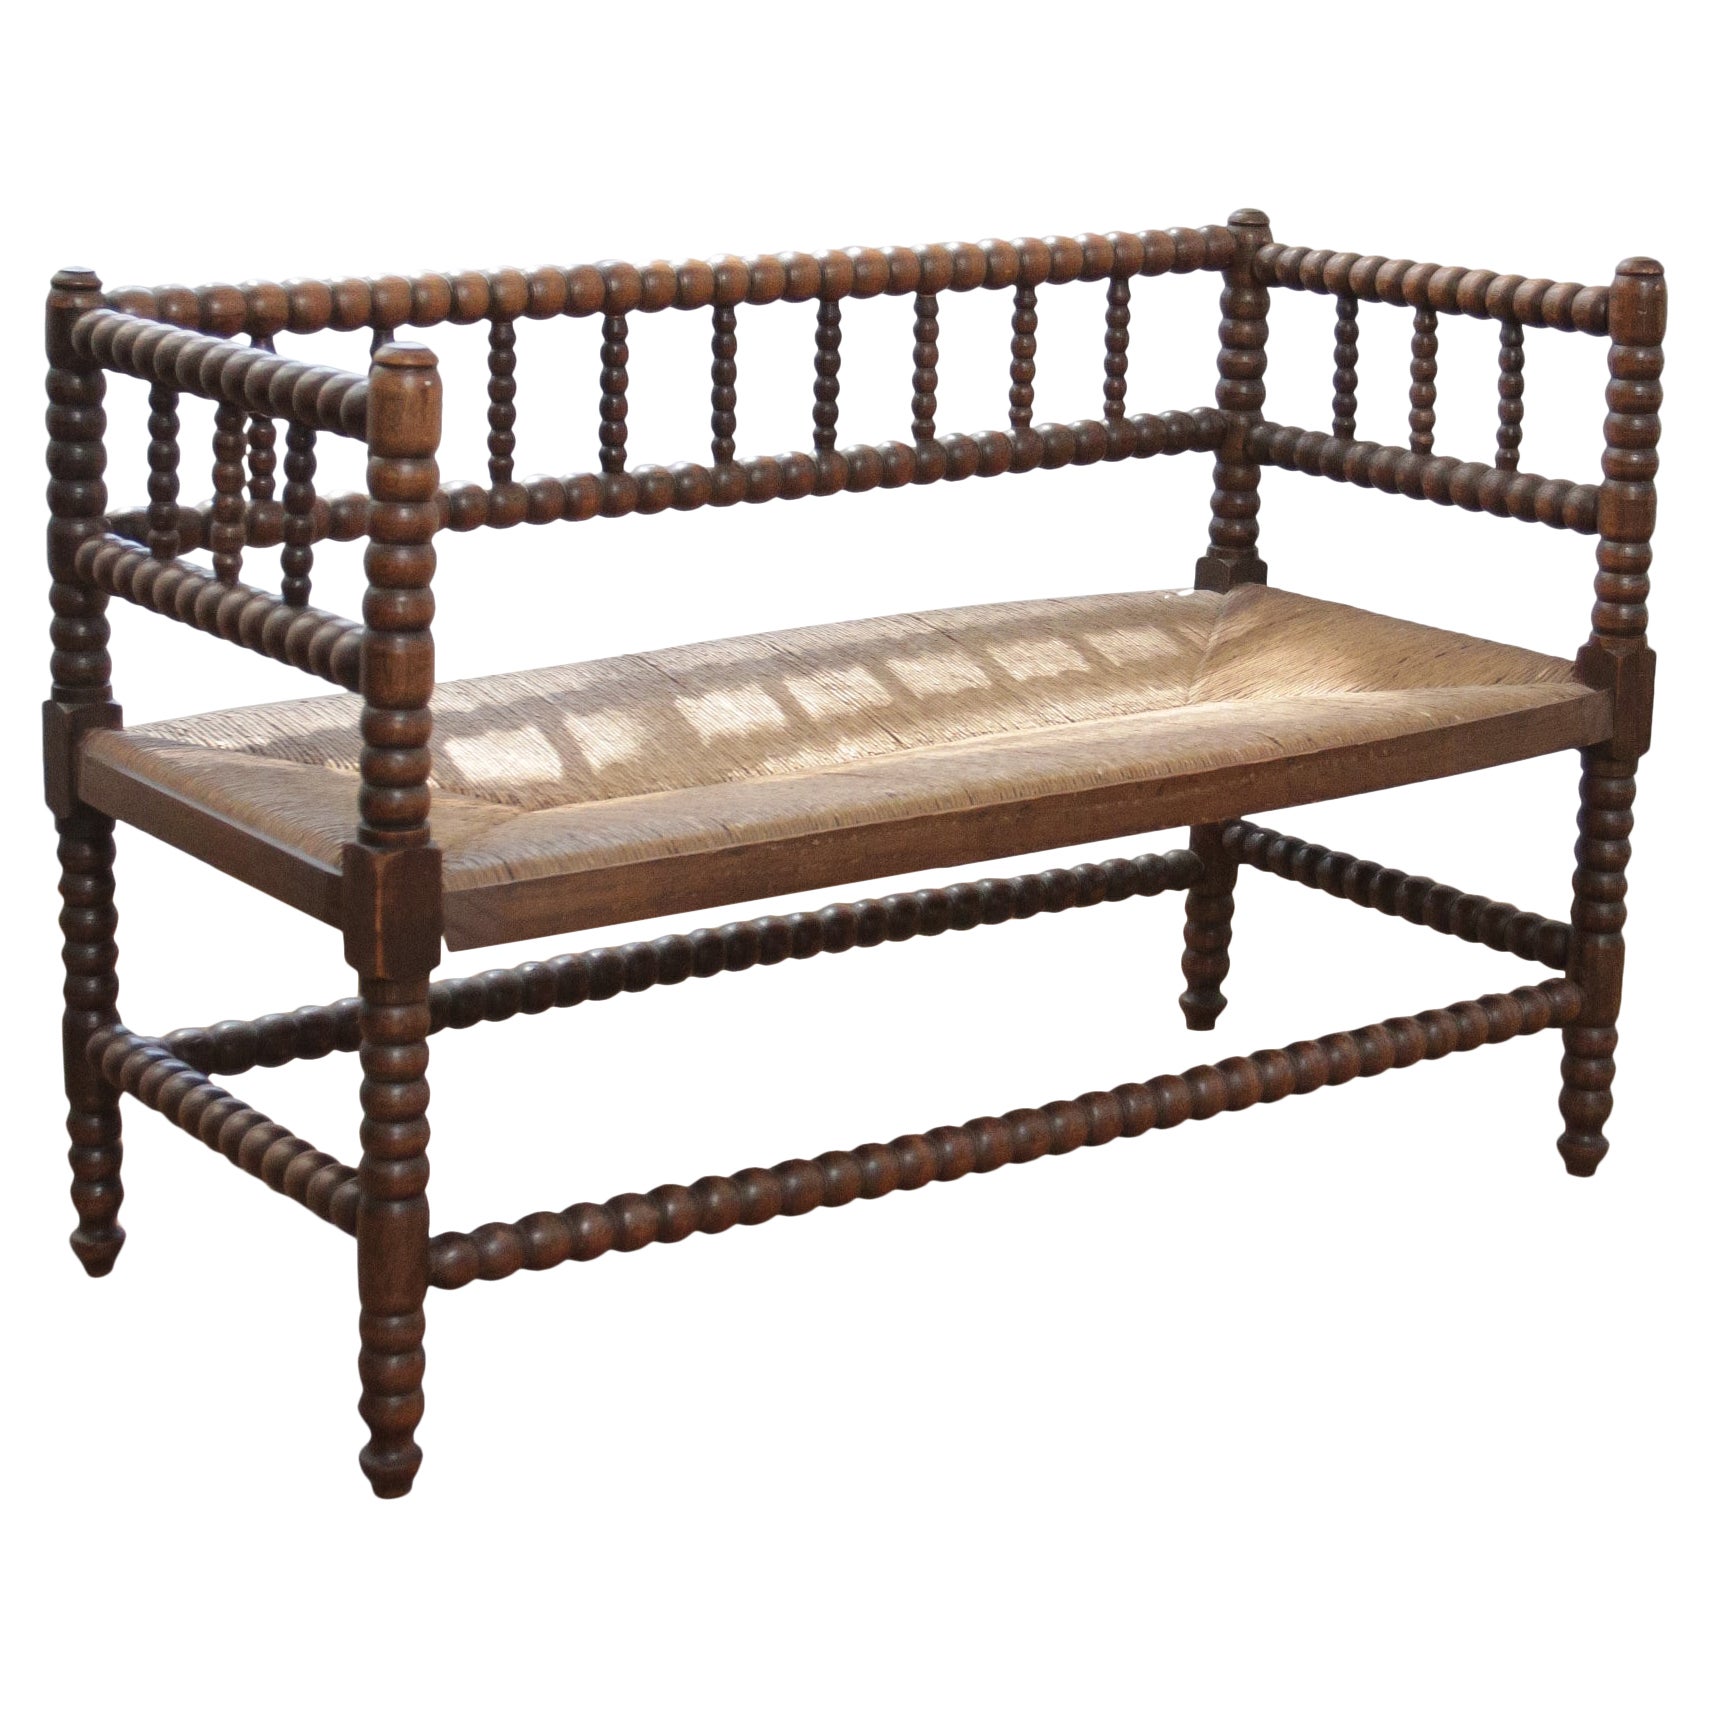 Antique Bobbin Bench A Blend of Craftsmanship and Heritage Rush Woven seat